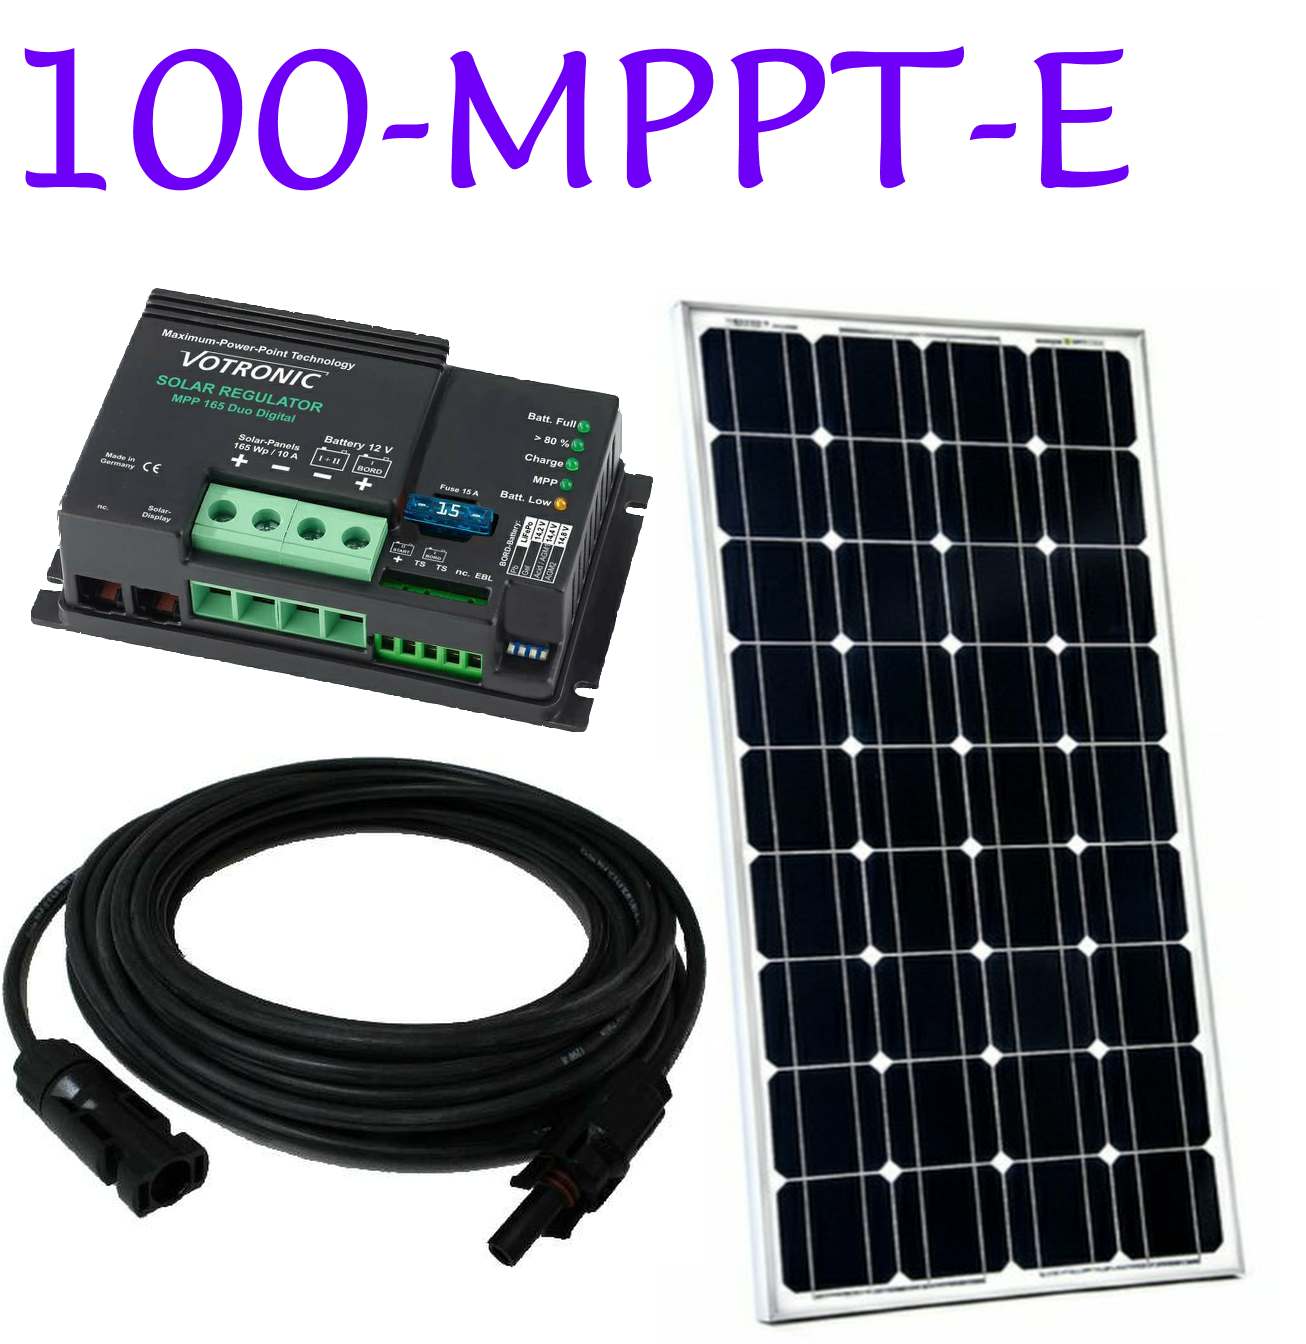 MPPT solar panel kit. From 50 to 200 watts. By SunWorks